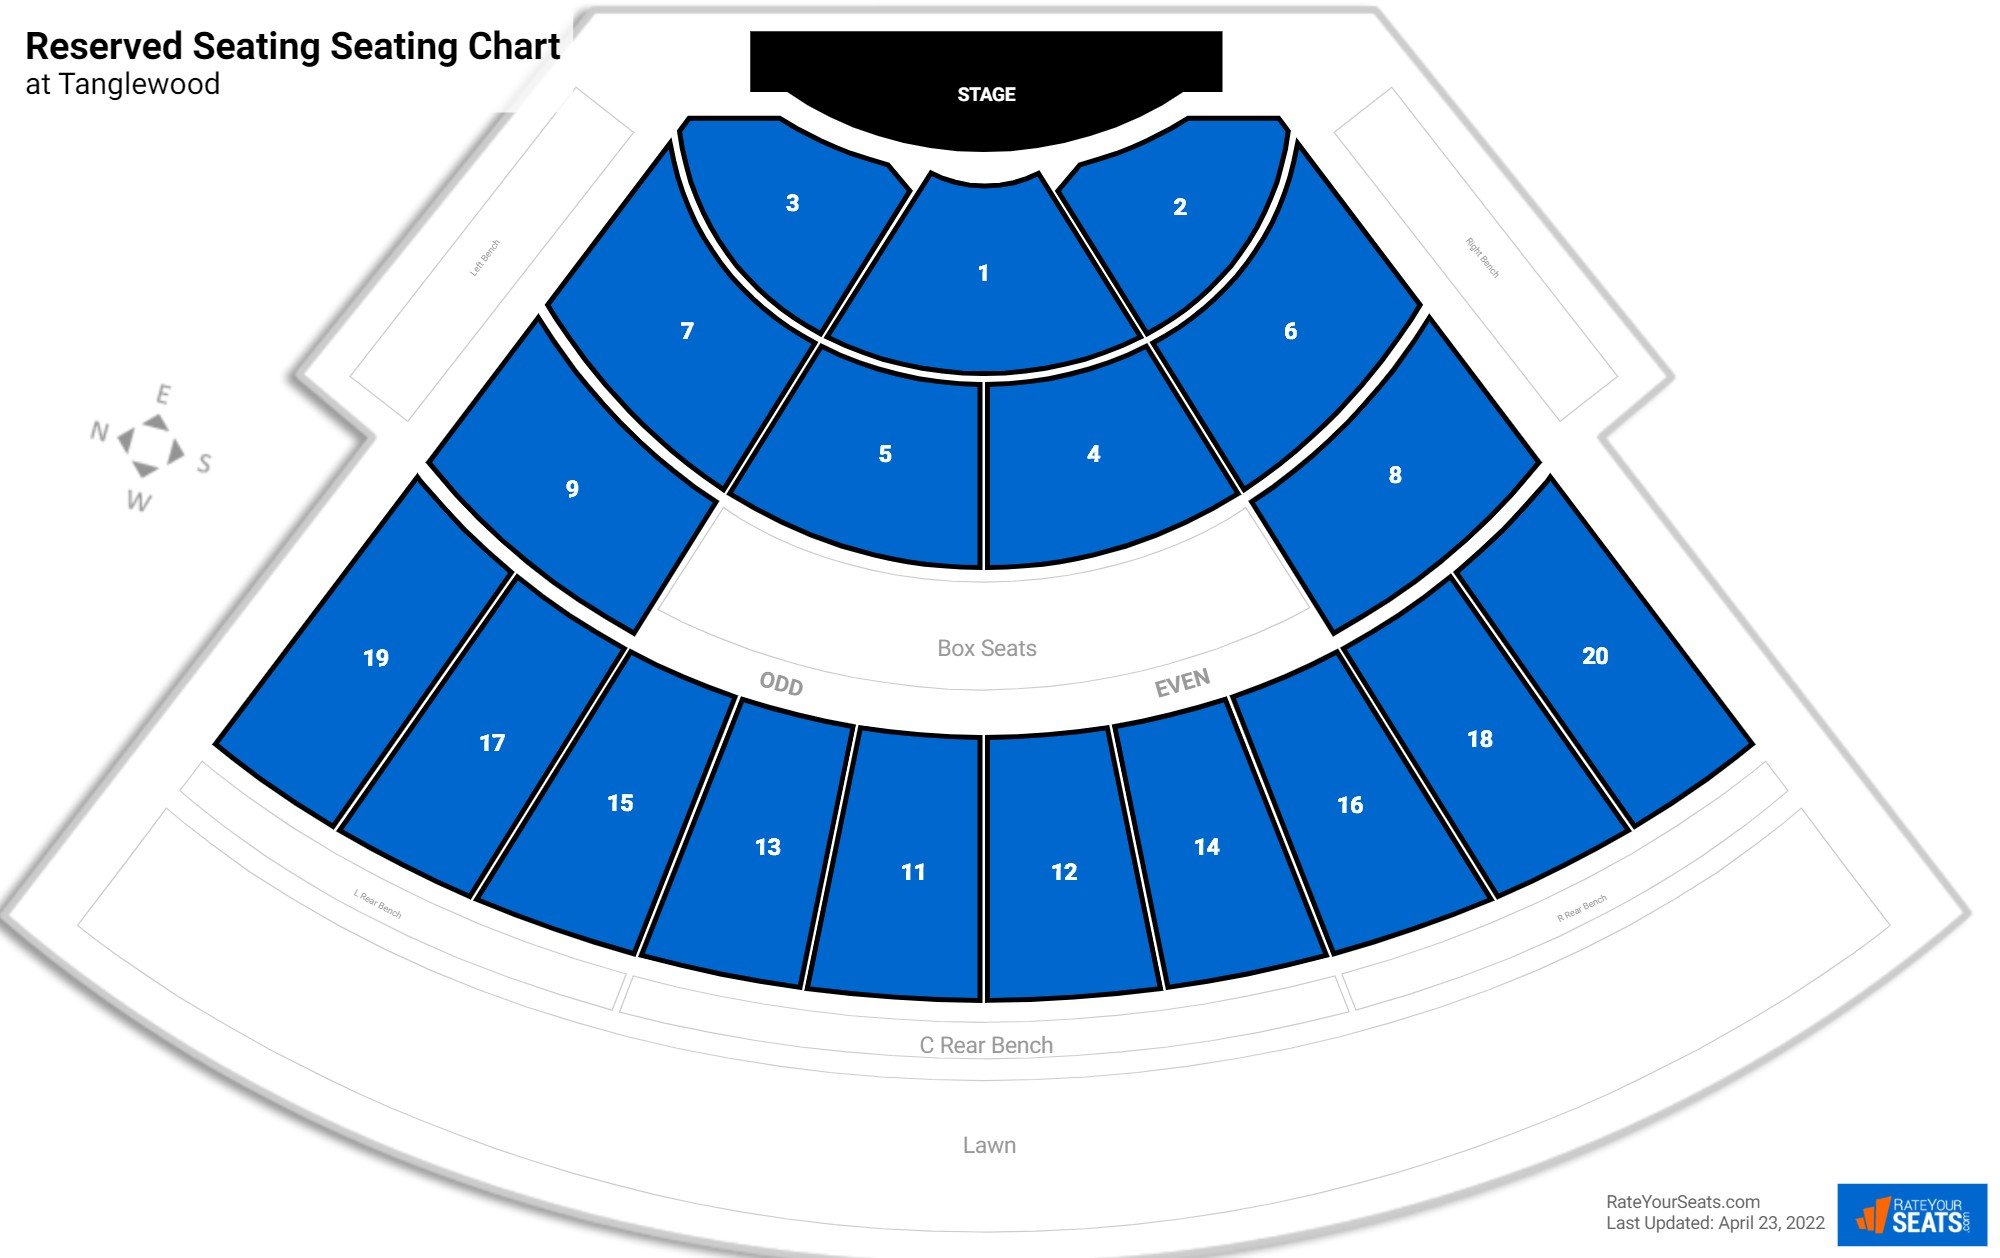 Tanglewood Reserved Seating - RateYourSeats.com